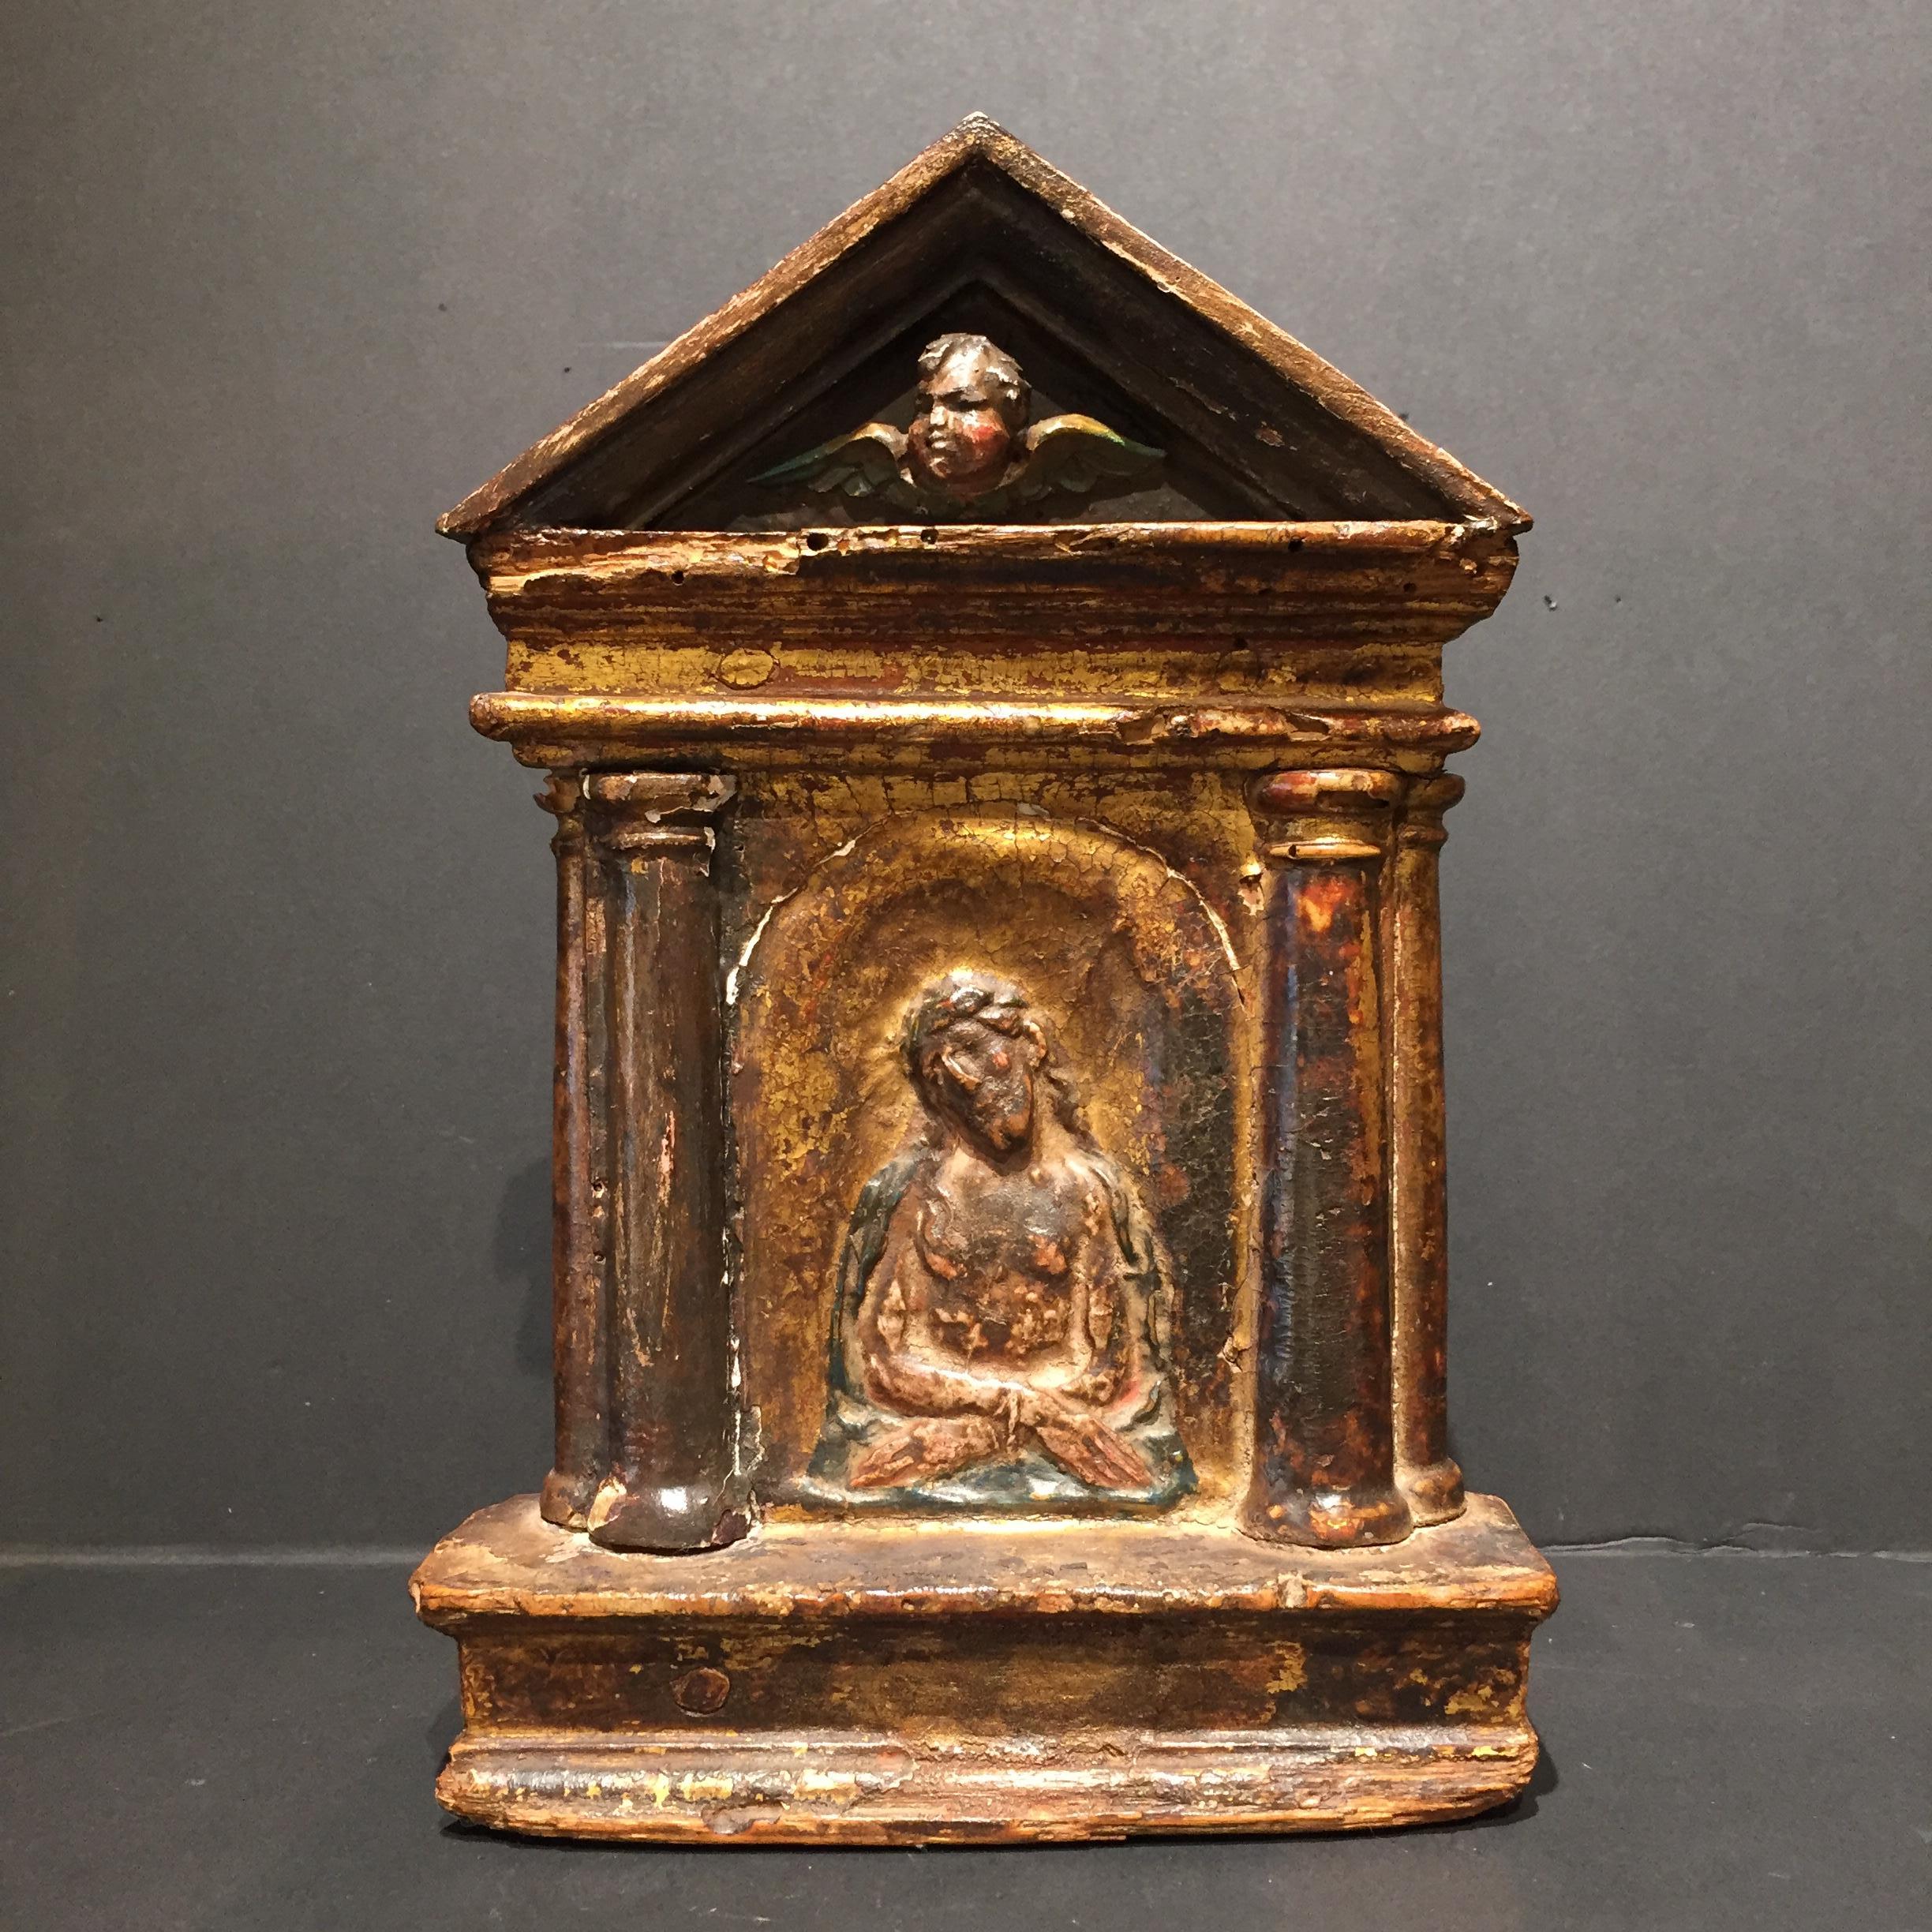 Italy
16th century

A liturgical Pax Brede or Osculatorium. The carved wooden board “Kiss of Peace” representing Christ as a man of sorrows. The pax has the shape of an ancient temple. Christ is placed in a niche between four balusters. The upper